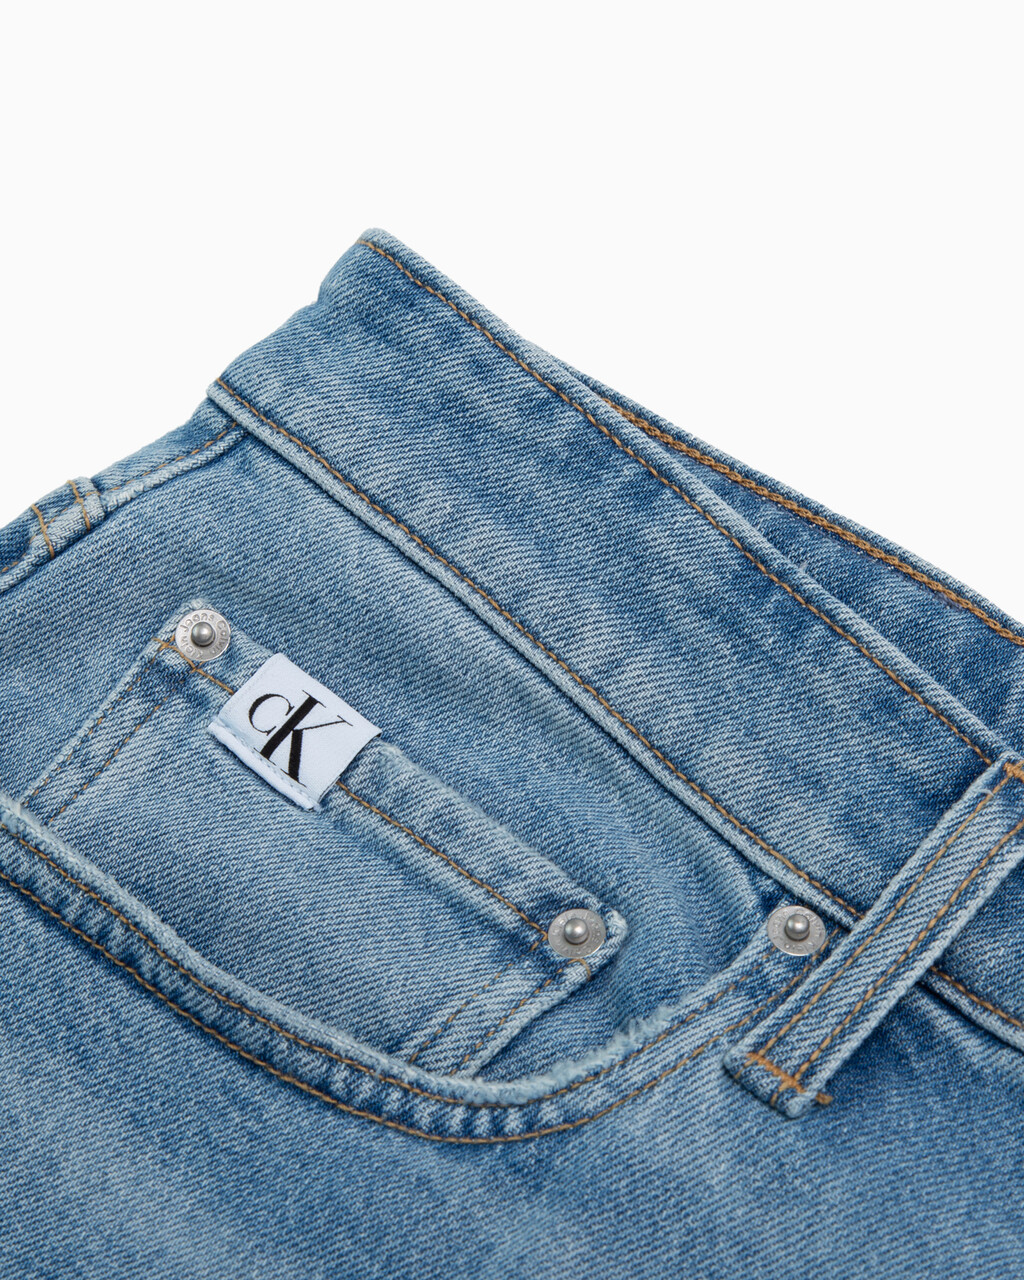 Recycled Cotton 90s Straight Jeans, Denim Light, hi-res